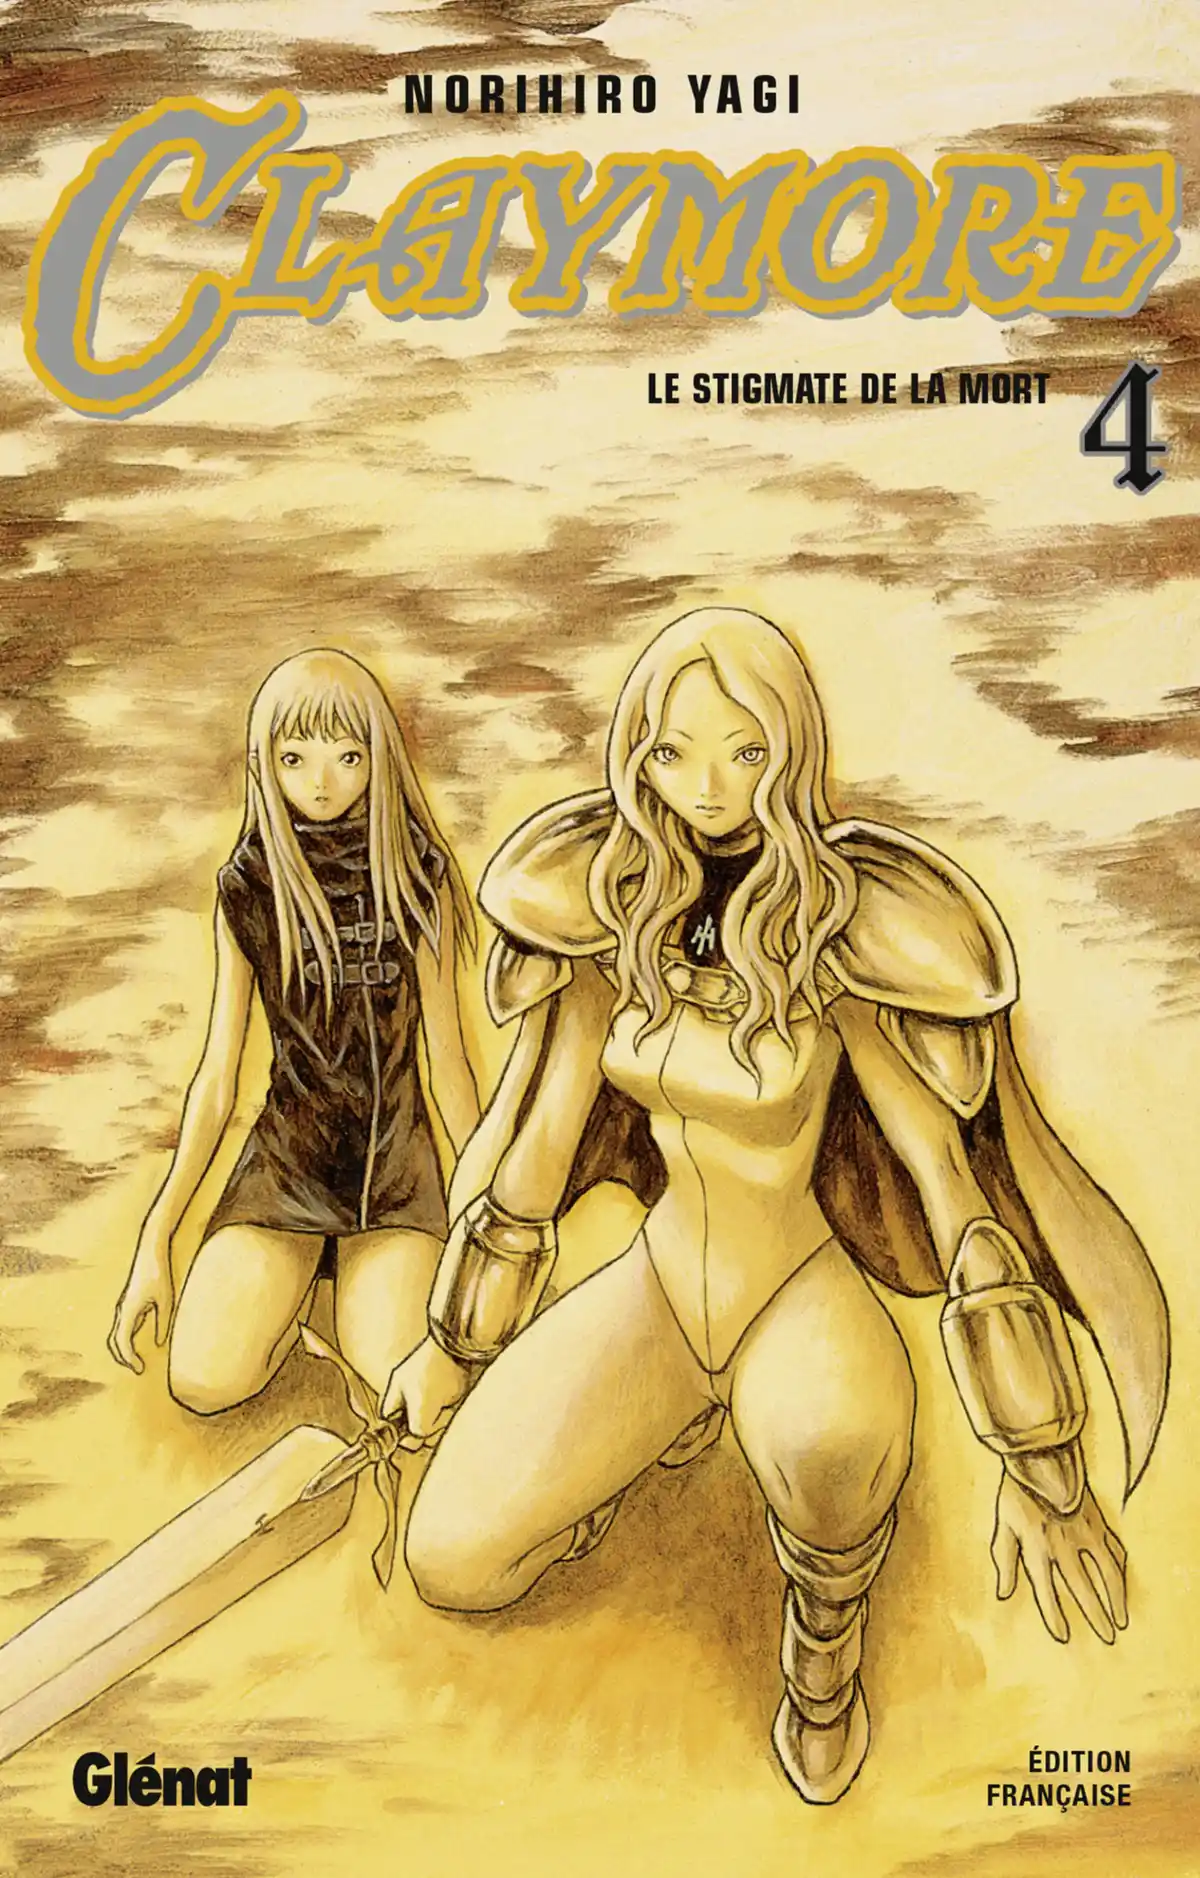 Claymore Volume 4 page 1